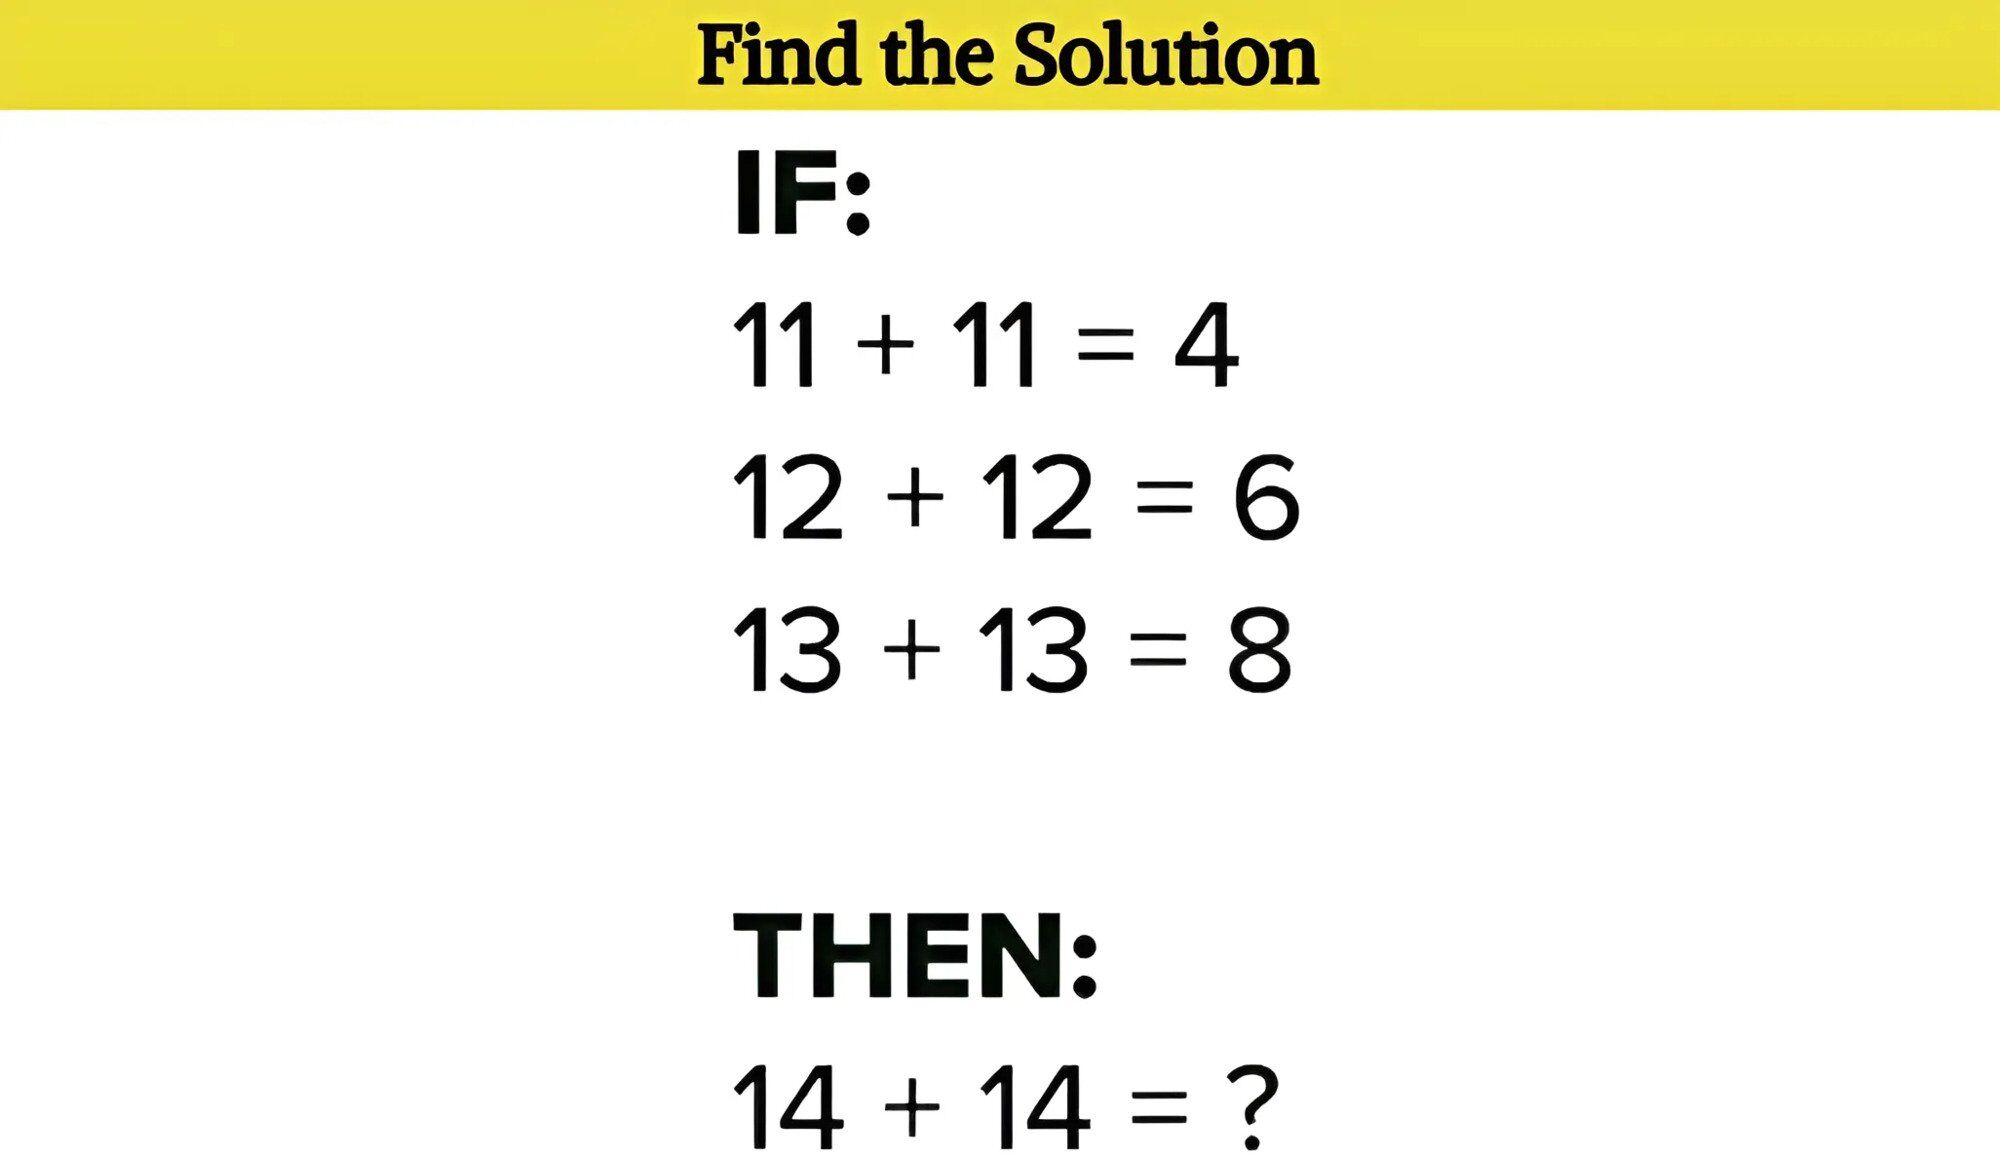 How much is 14+14? Solve the puzzle if the answer is not 28